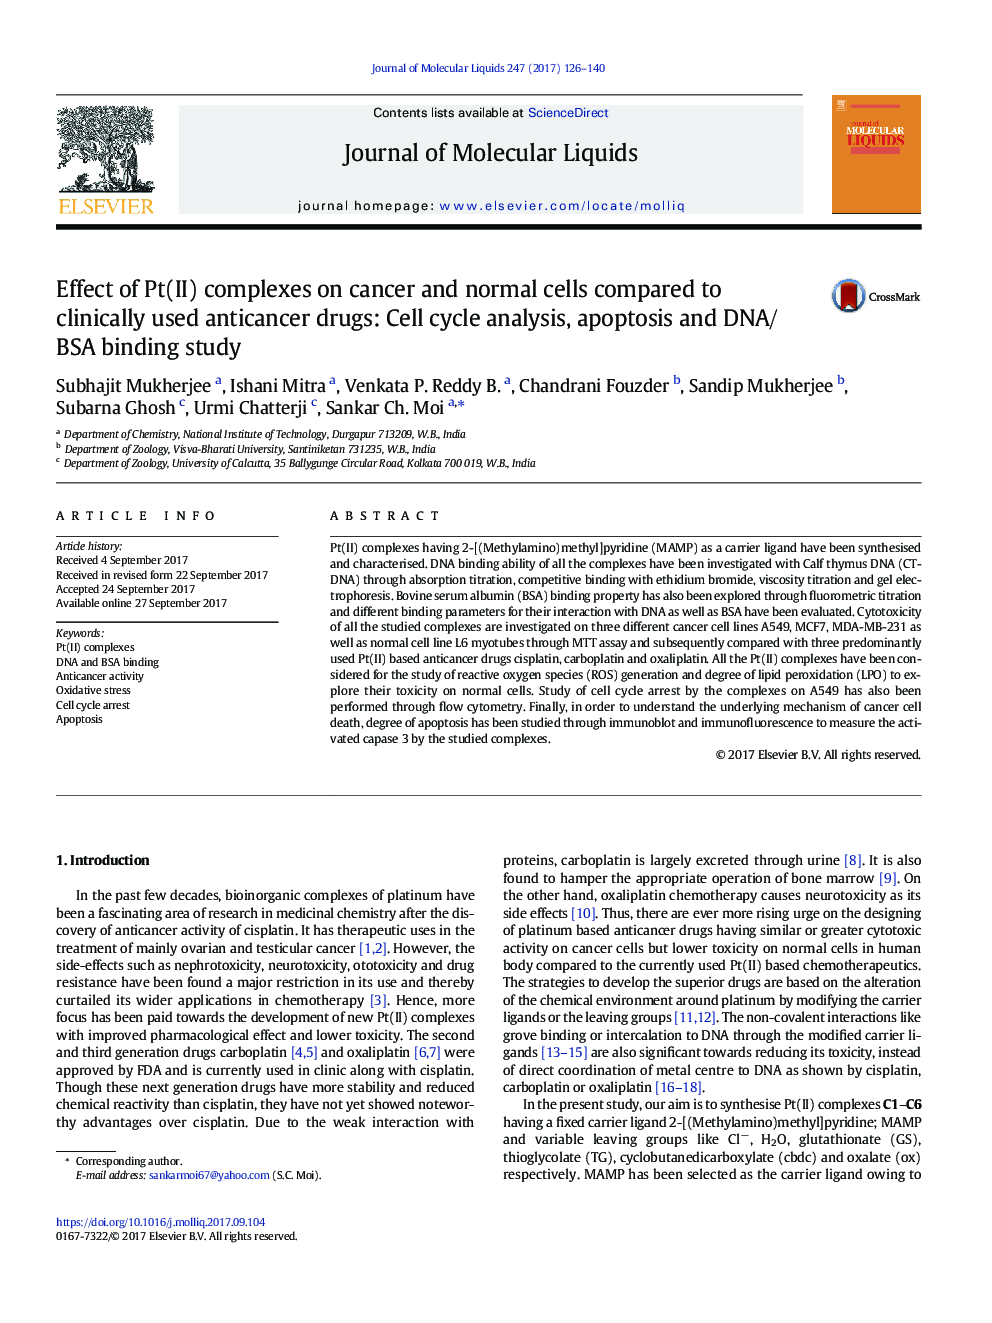 Effect of Pt(II) complexes on cancer and normal cells compared to clinically used anticancer drugs: Cell cycle analysis, apoptosis and DNA/BSA binding study